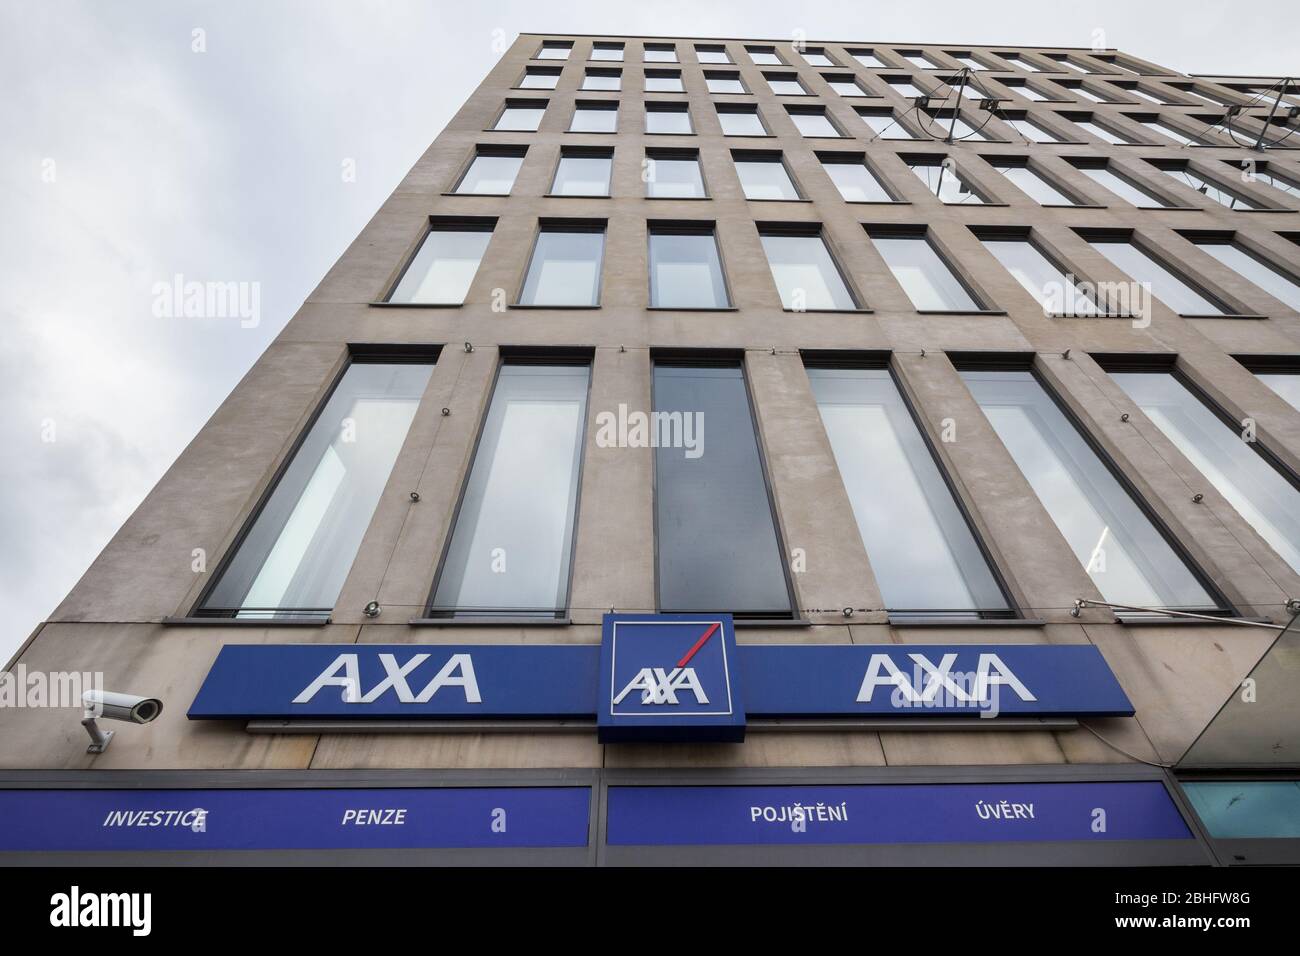 BRNO, CZECHIA - NOVEMBER 4, 2019:  Axa logo on their local agent in Brno. Axa is a French insurance and banking group, one of the biggest insurers of Stock Photo